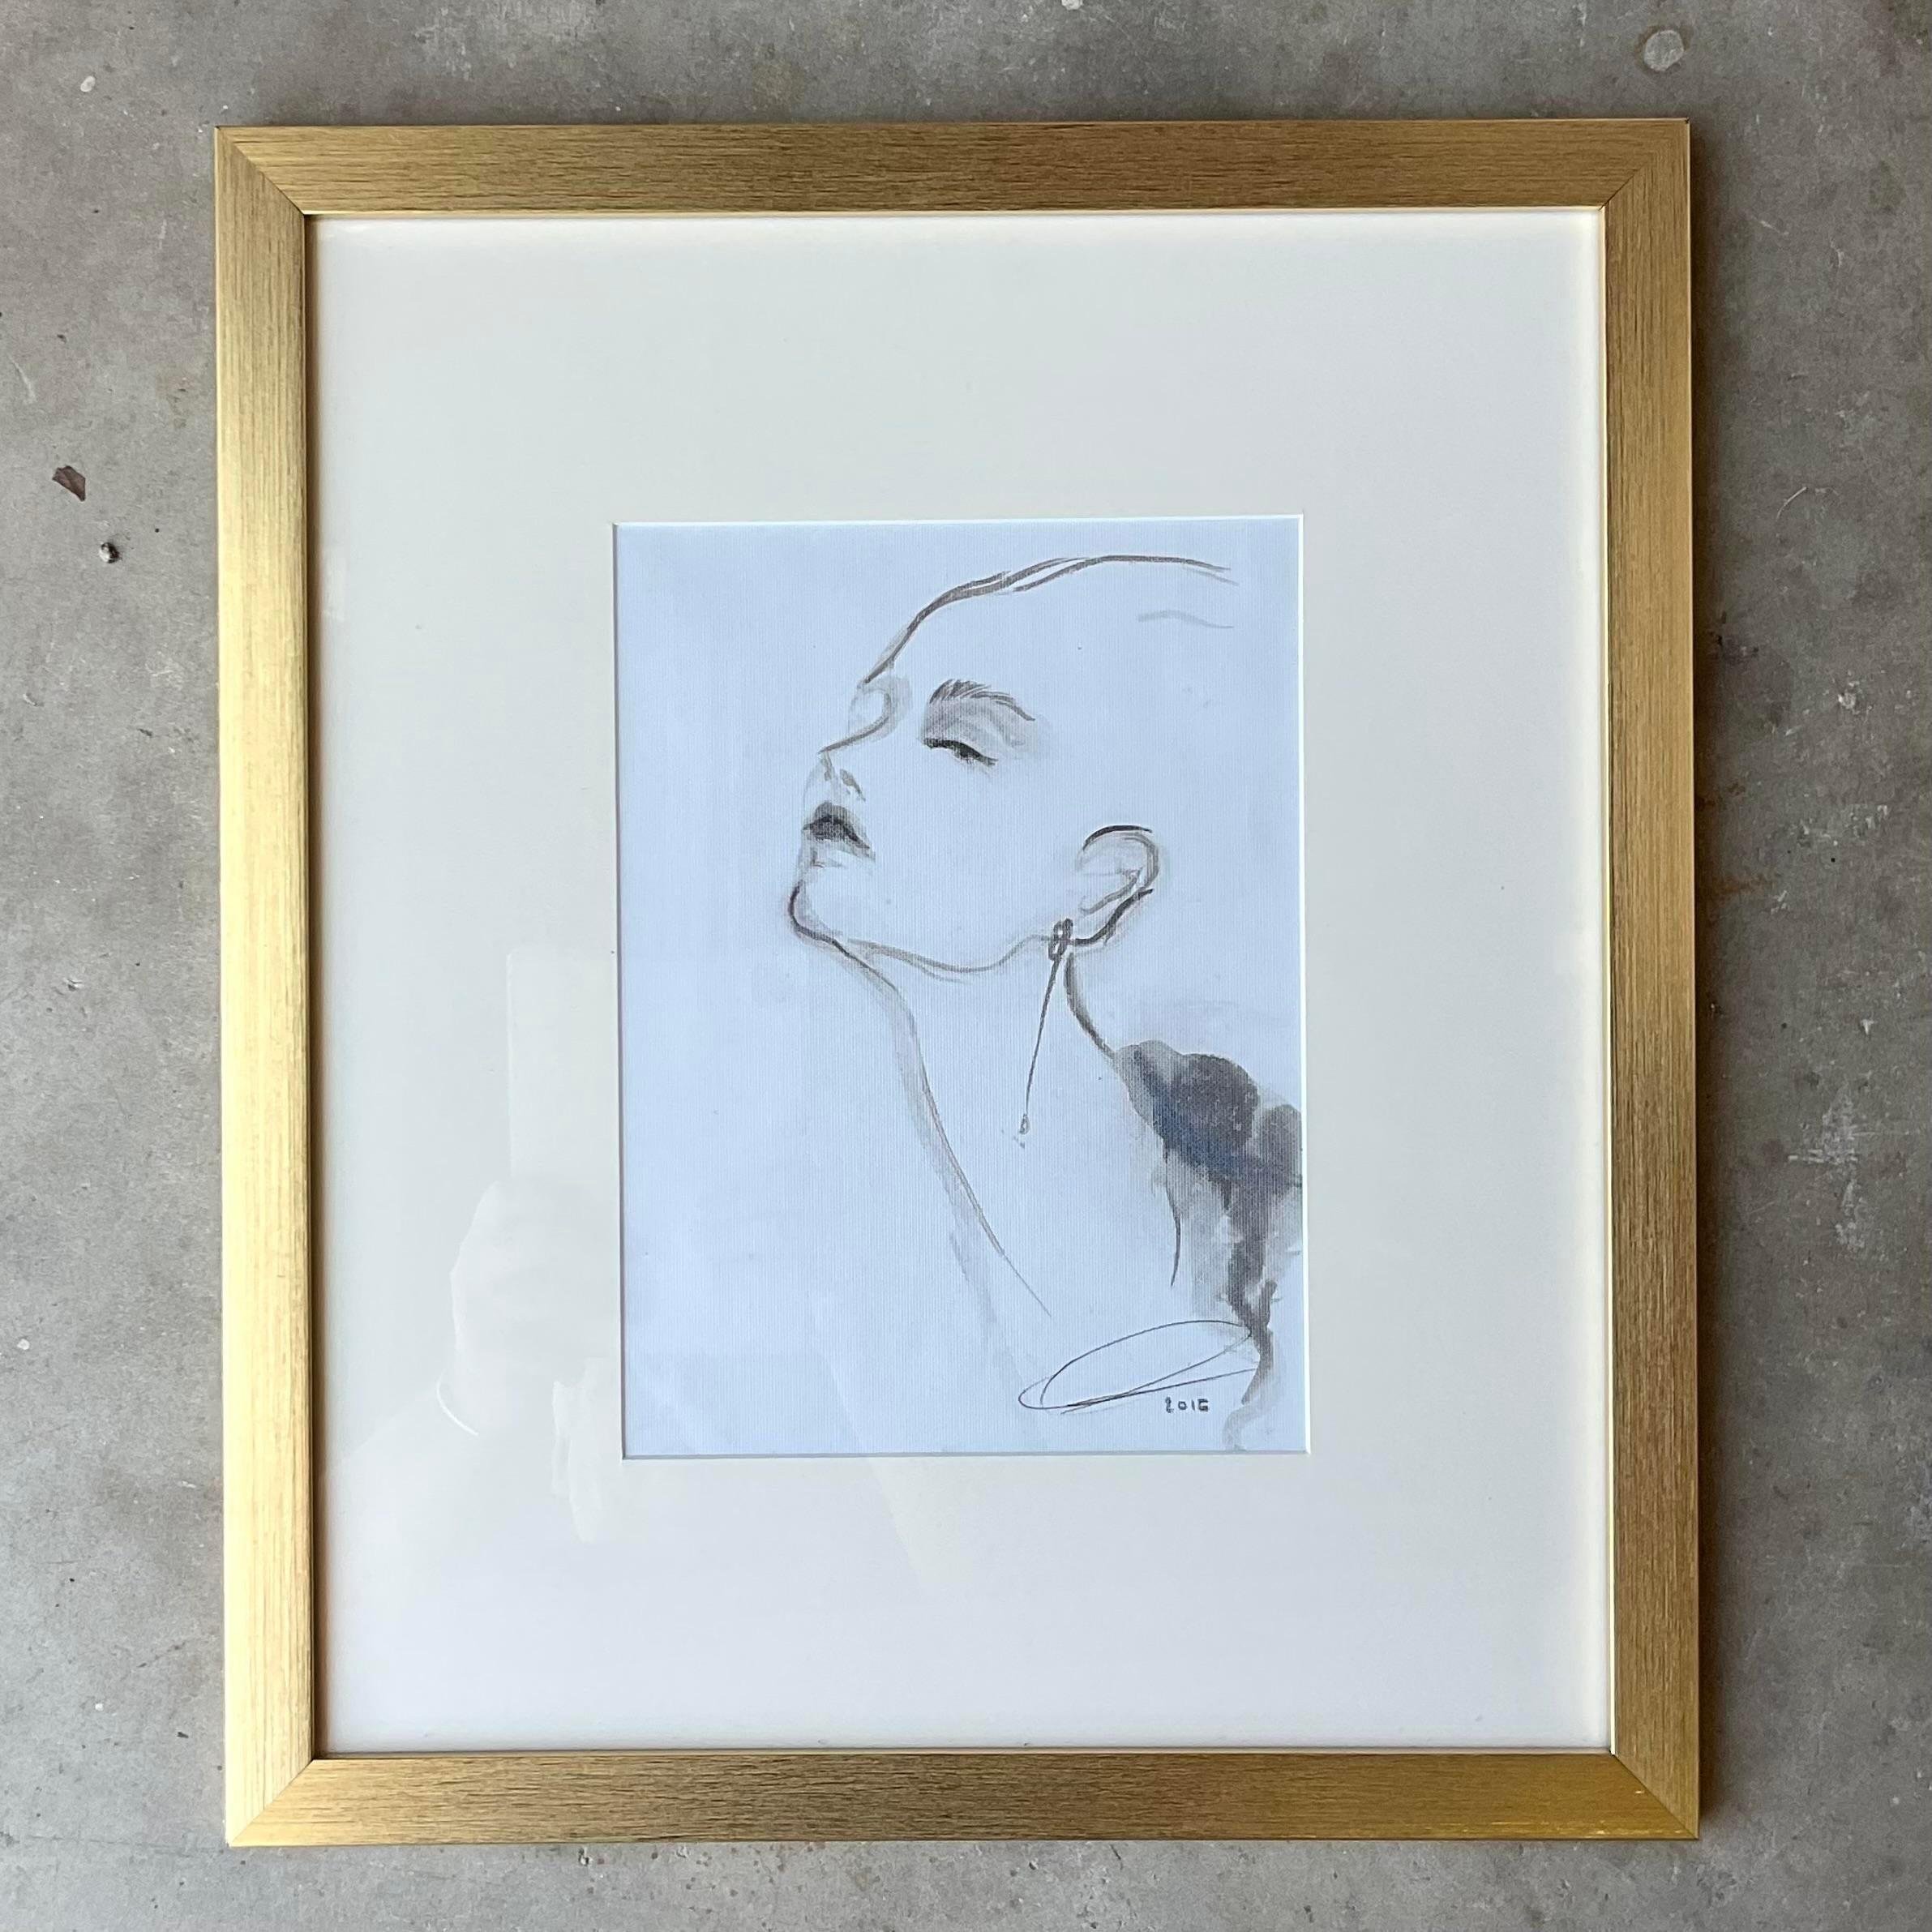 A stunning vintage Regency Original sketch of a woman. A beautiful composition of a model in profile. Signed and dated by the artist 2015. Acquired from a Palm Beach estate.